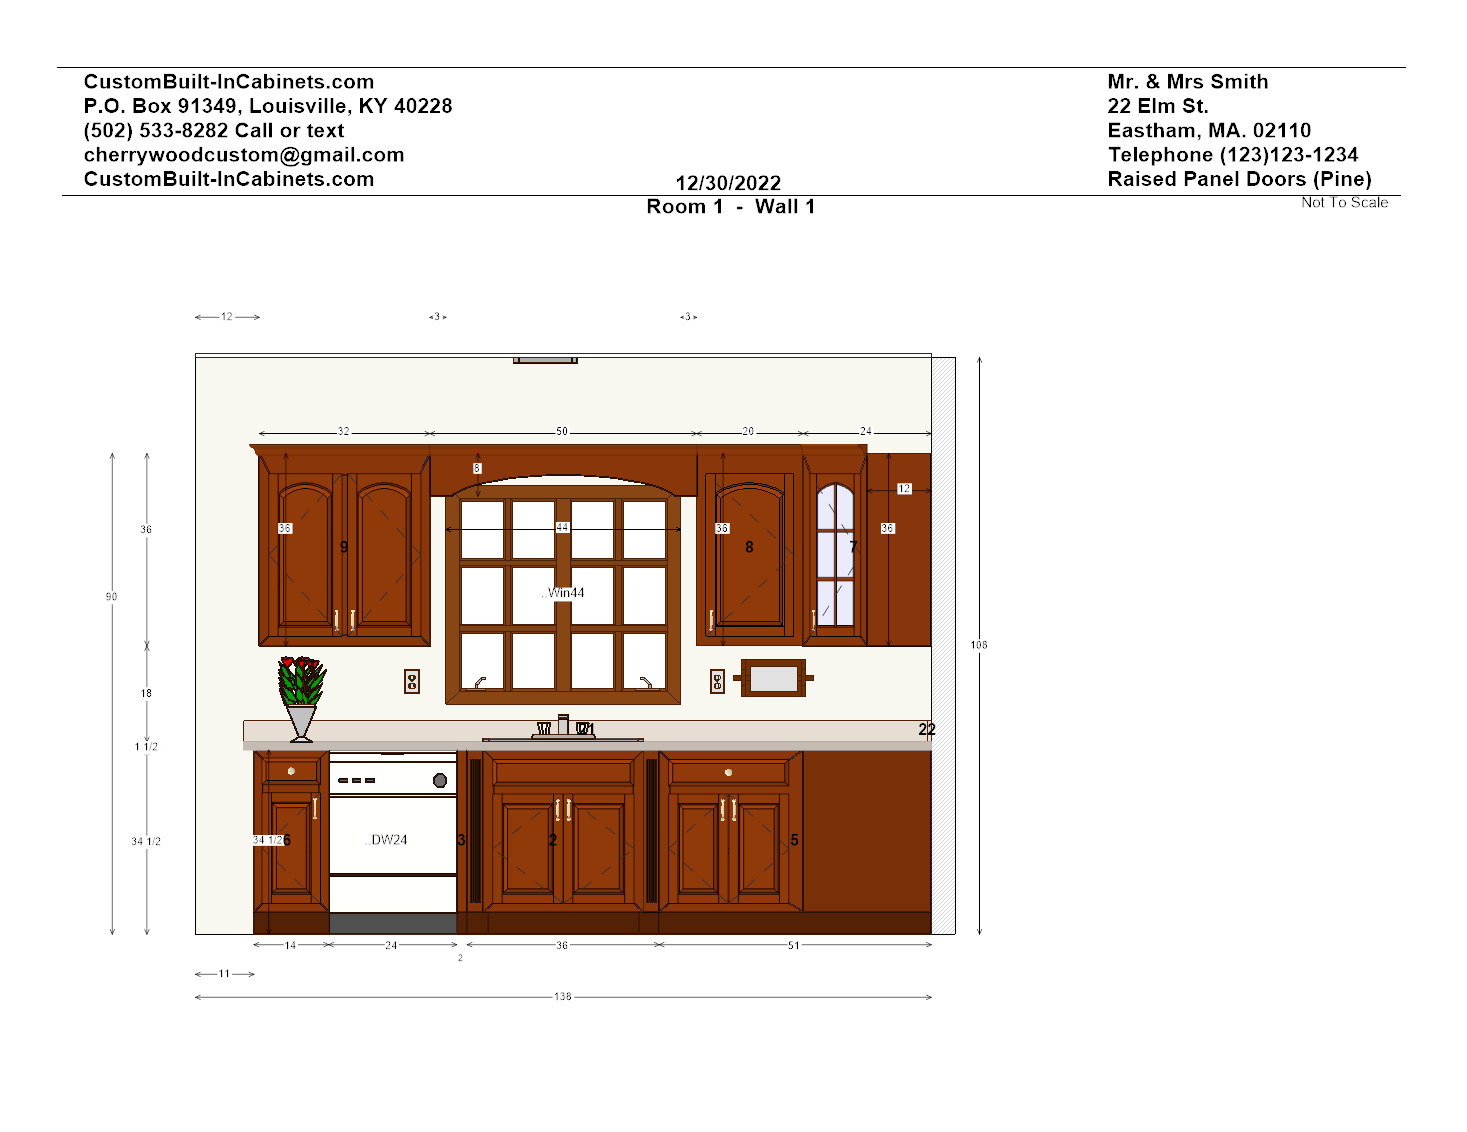 This is sketch 2 of 3 examples images of a custom cabinetry project by Ryan Bruzan. This sketch is a front view digital sketch of a wall of kitchen cabinets on a cabinetry design project by Ryan Bruzan and Cherrywood Custom Woodworking.